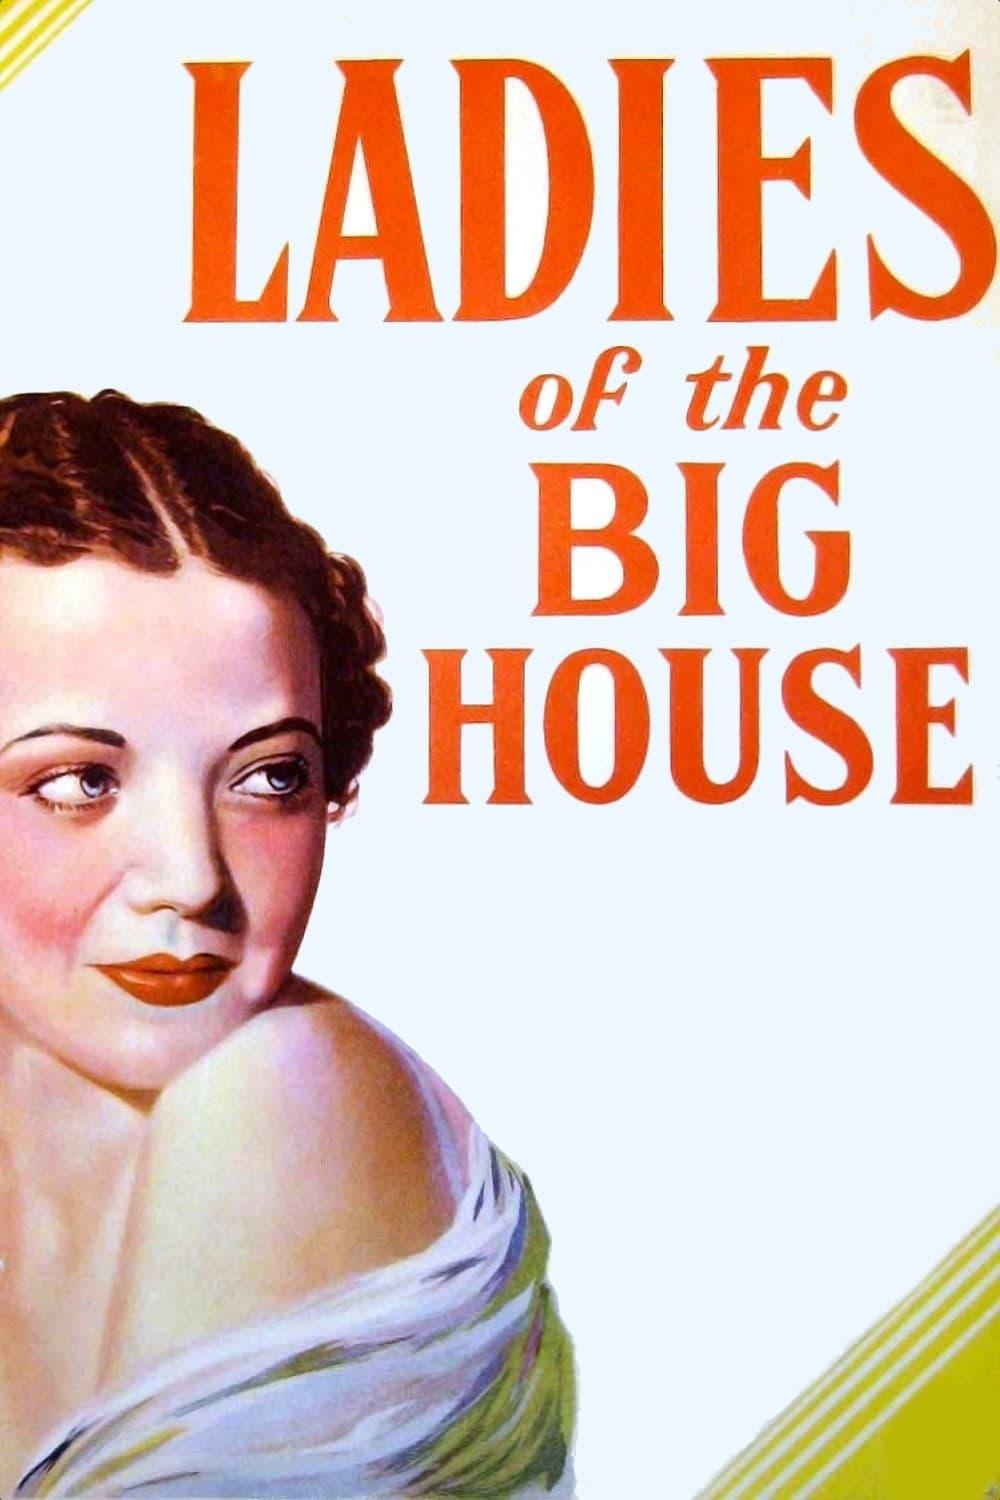 Ladies of the Big House poster